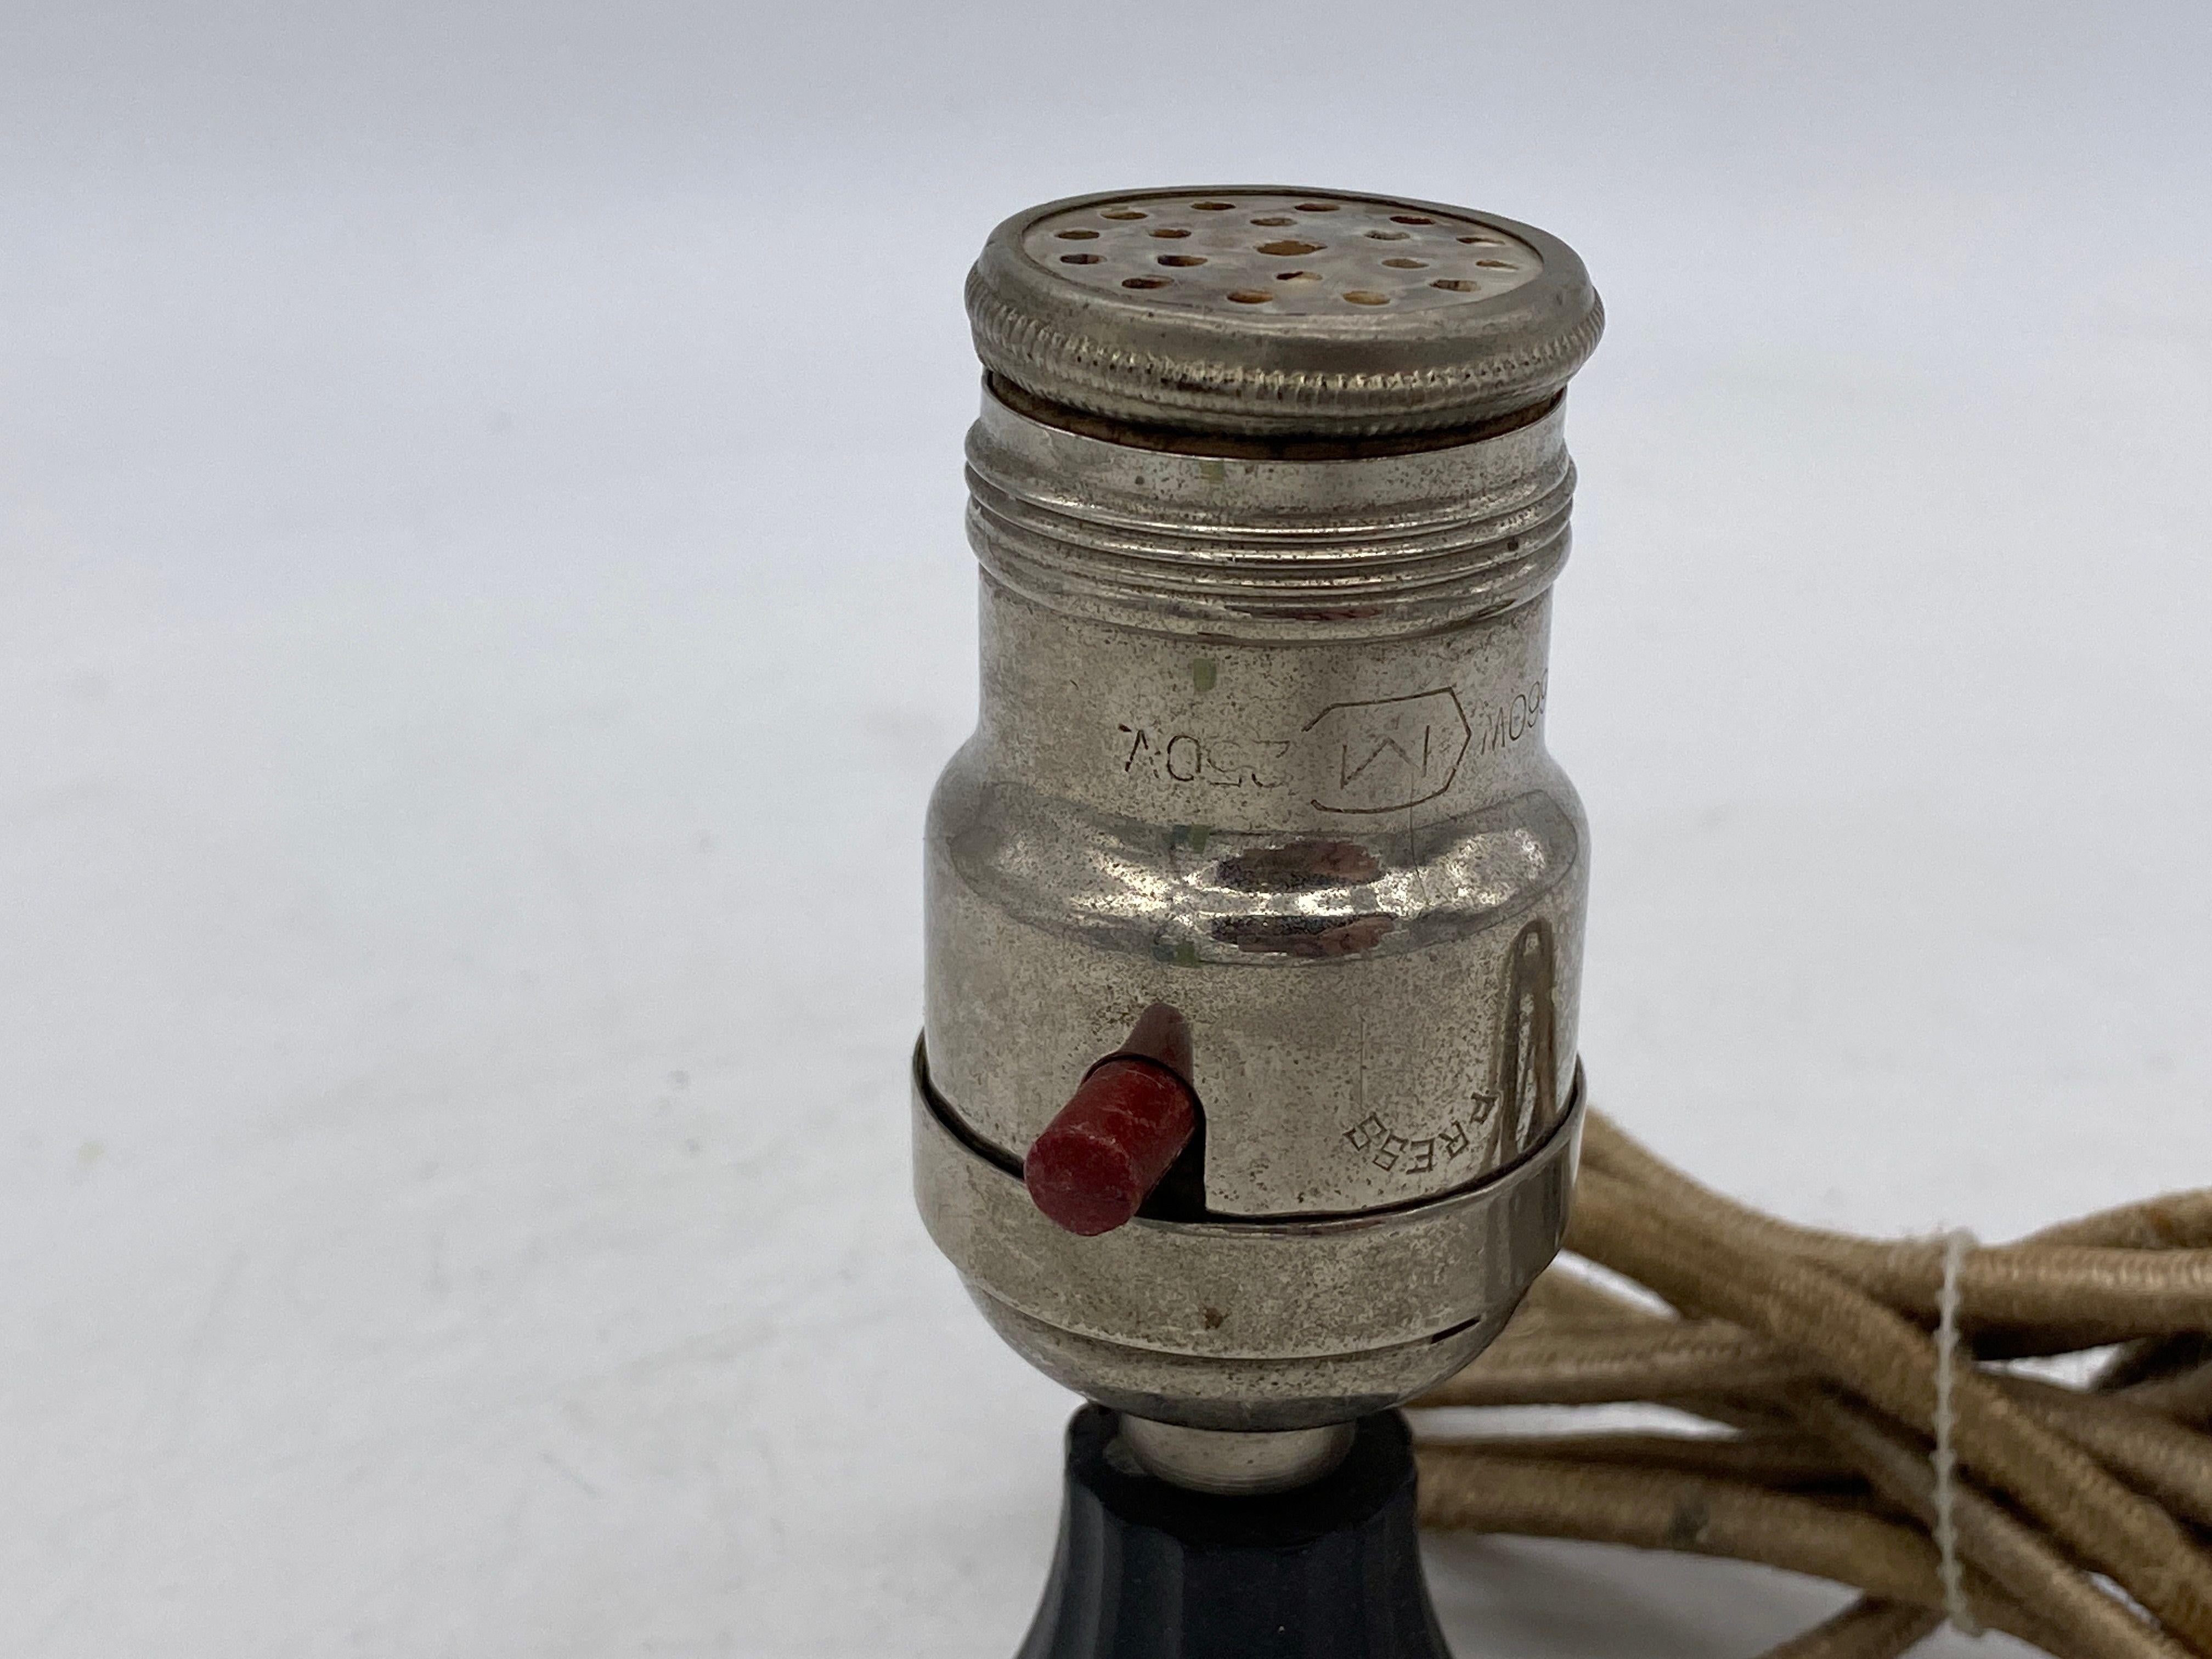 Pre-War electric lamp base lighter, featuring a modified lamp socket fixed with an electric lighter similar to car light.

Circa 1930.